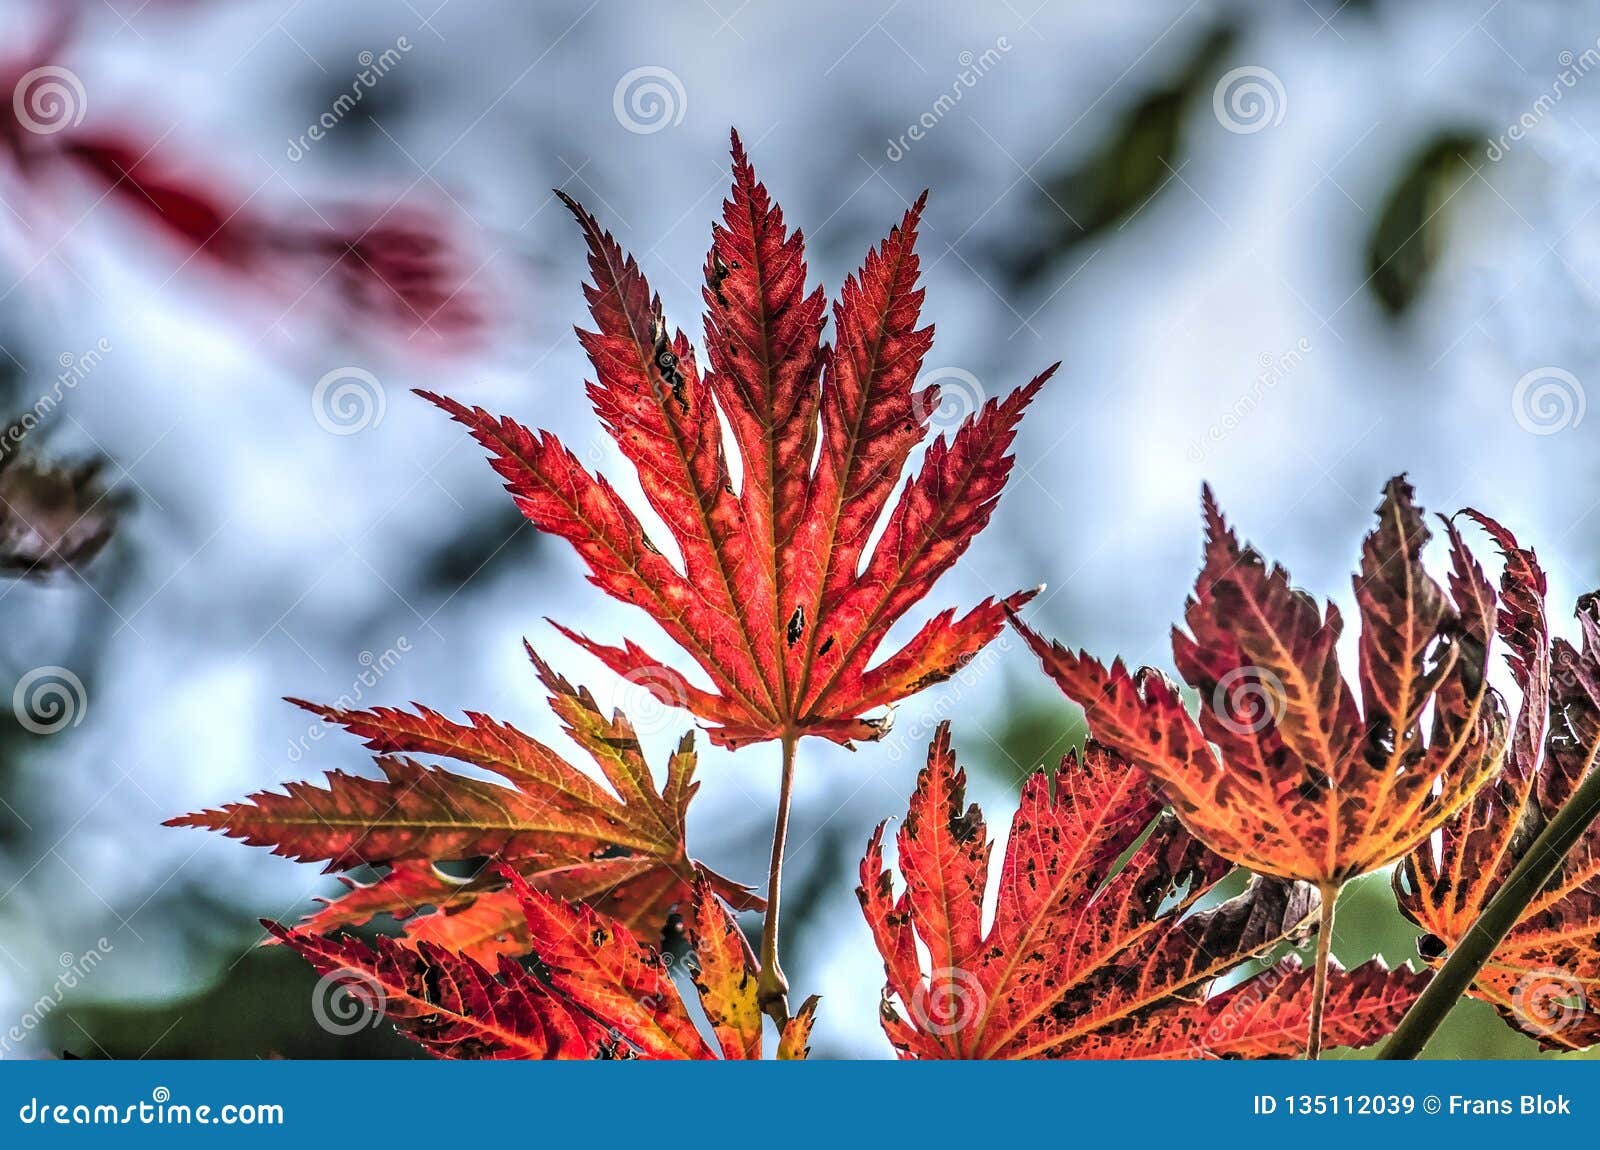 Fiery acer leaves stock image. Image of holland, tree - 135112039